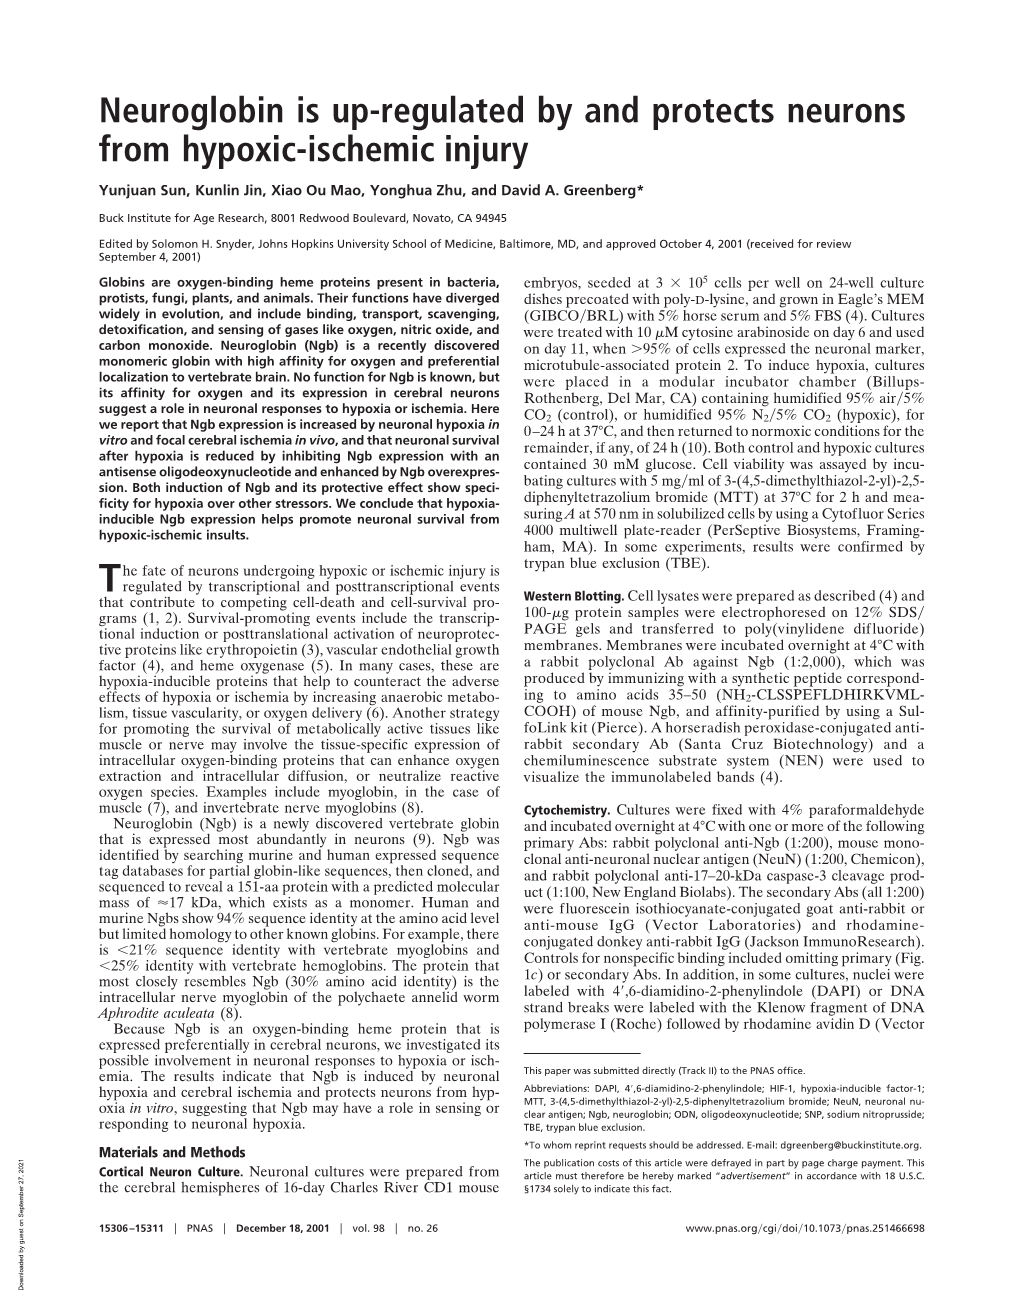 Neuroglobin Is Up-Regulated by and Protects Neurons from Hypoxic-Ischemic Injury